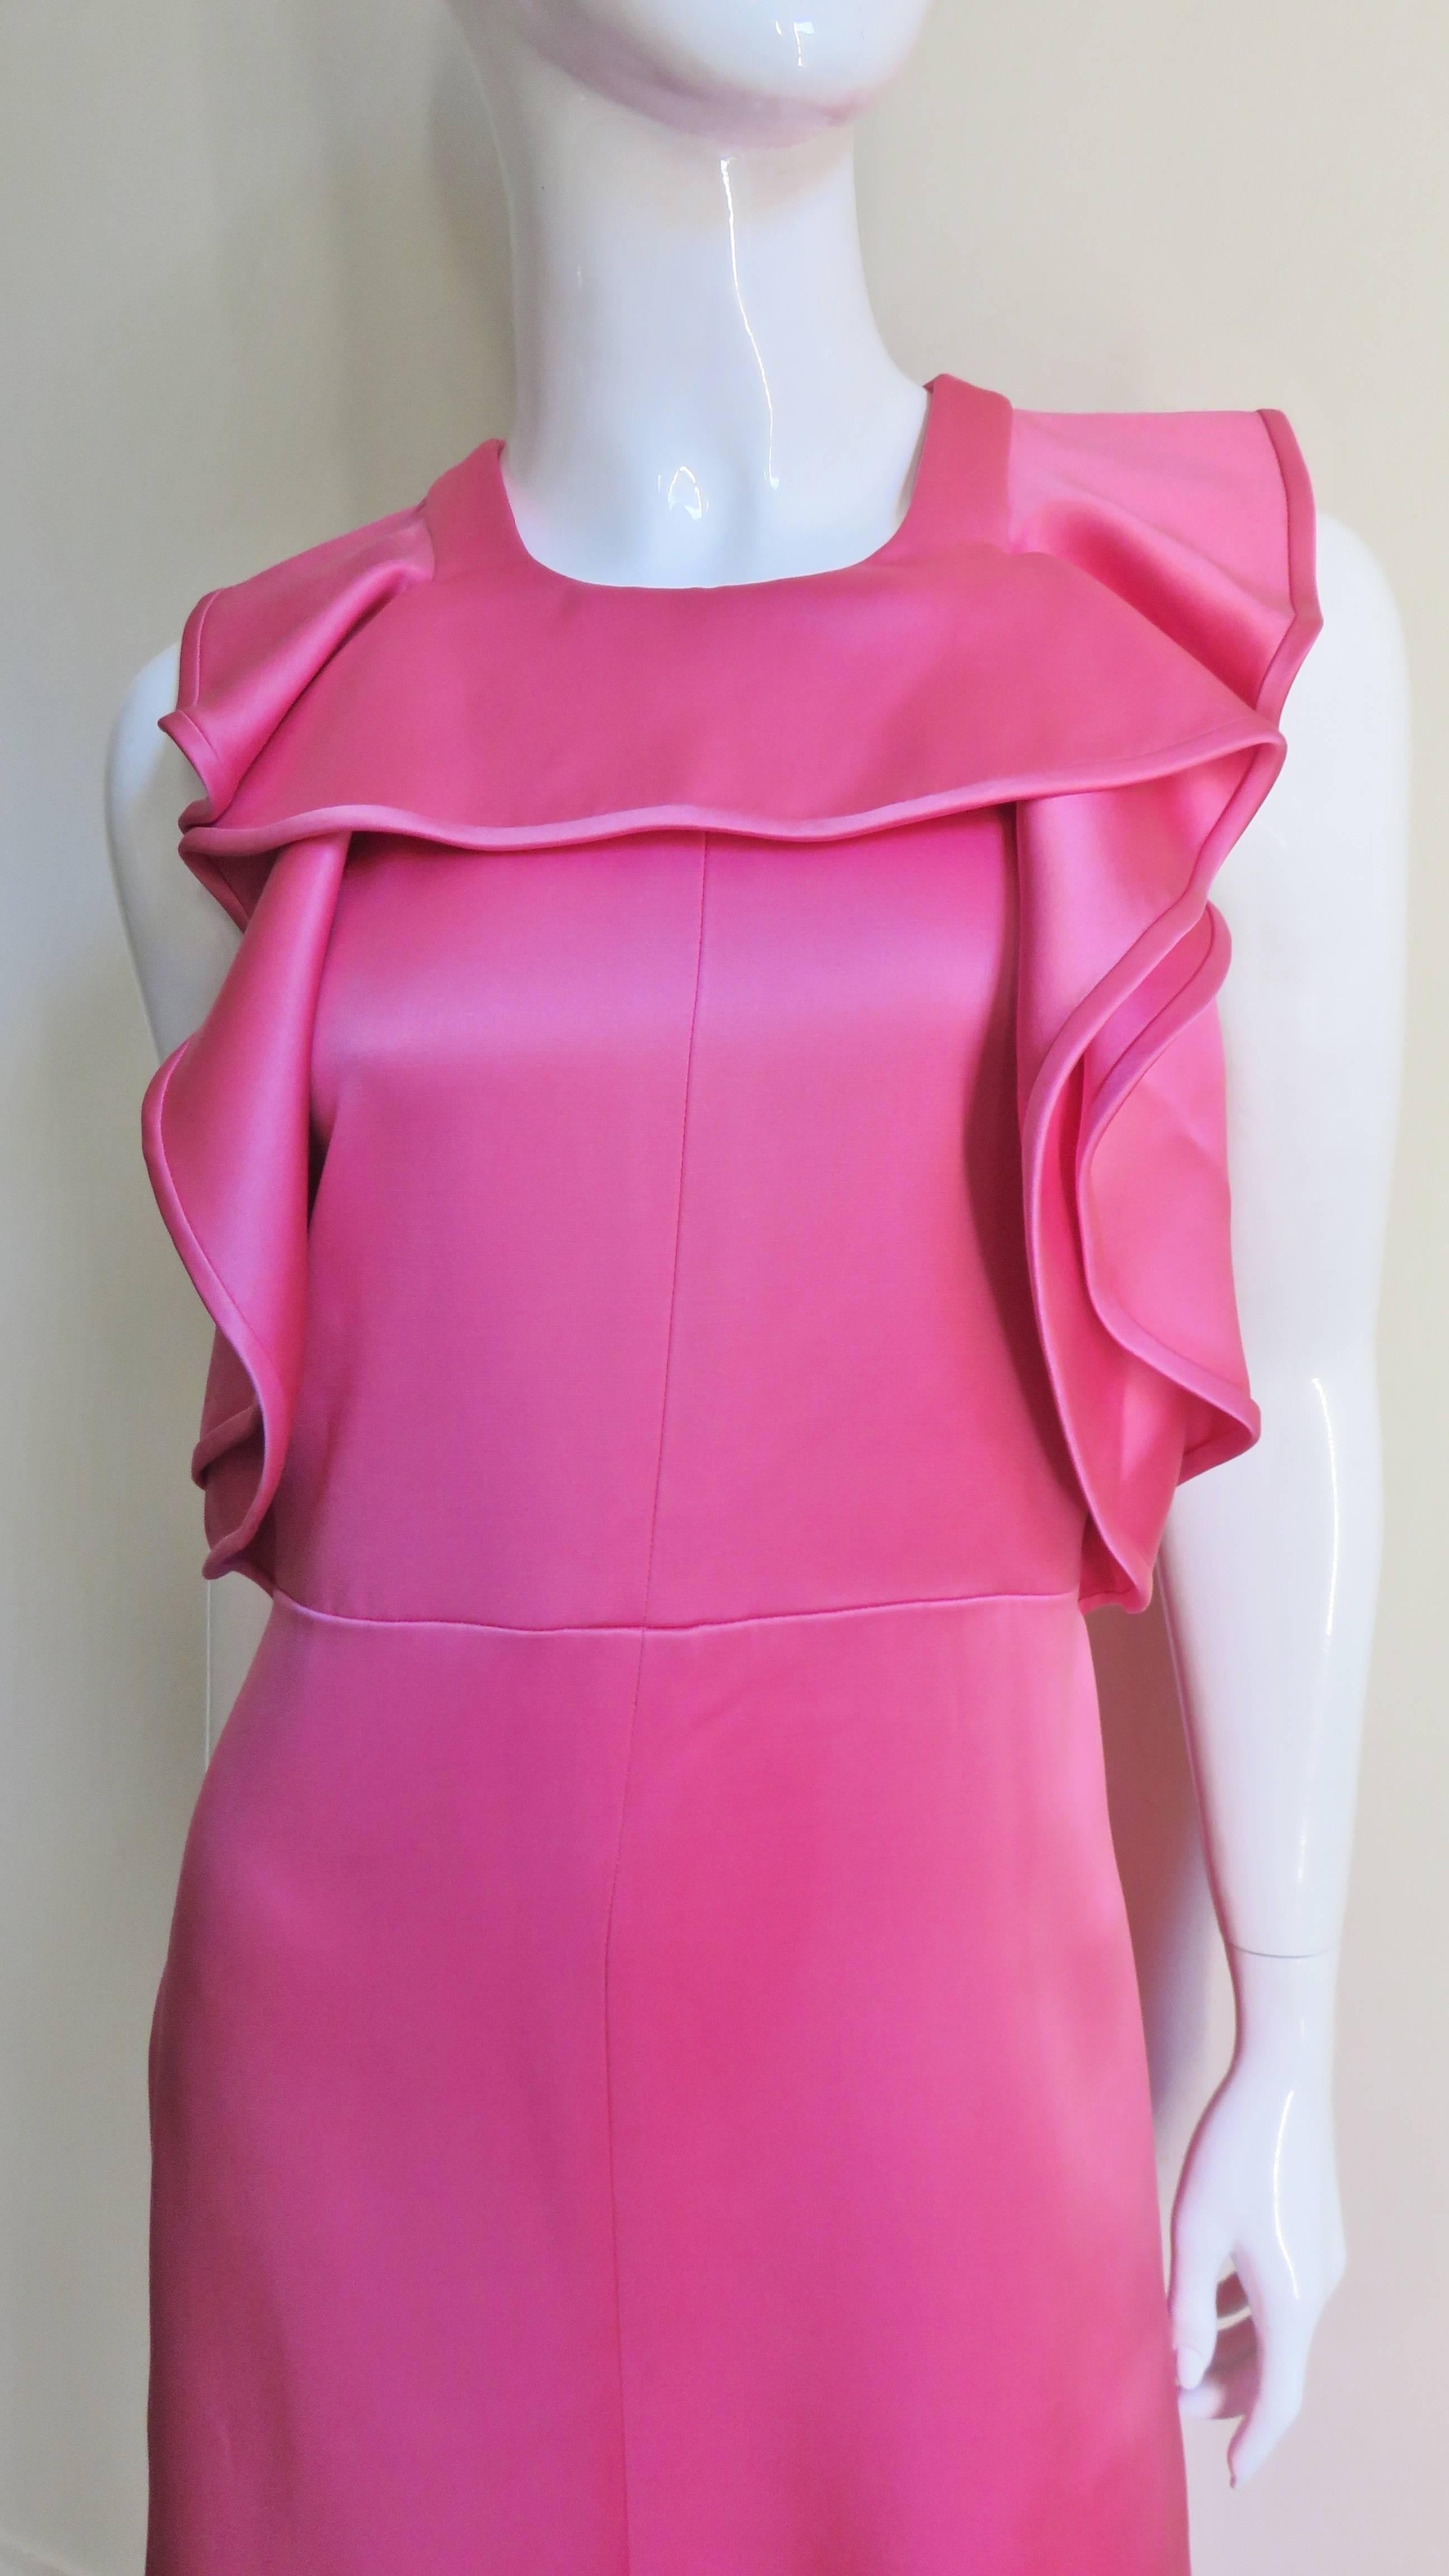 A gorgeous rose silk satin gown from Chloe. It has a 2 ruffles on the front bodice, one that comes from the side seams over the shoulders and the other which crosses at the neckline.  There are inset cap sleeves and a seam at the waist with a long